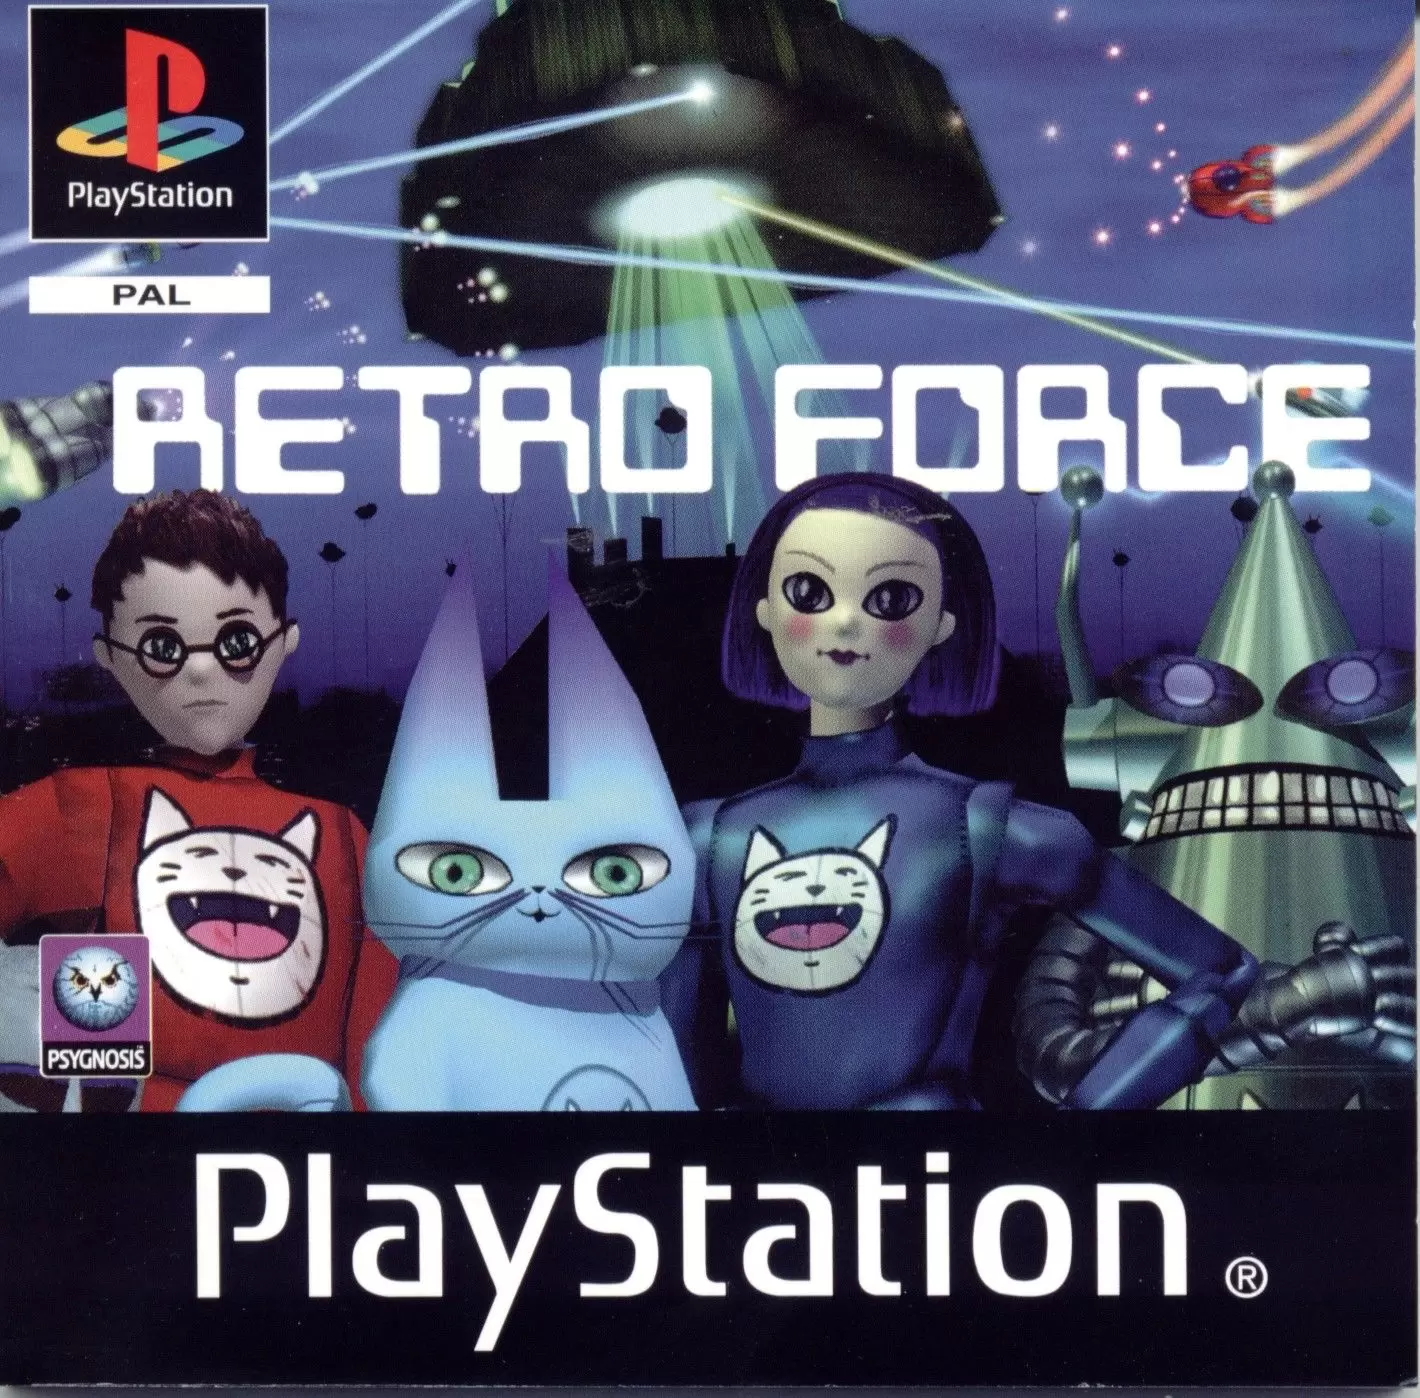 Playstation games - Retro Force